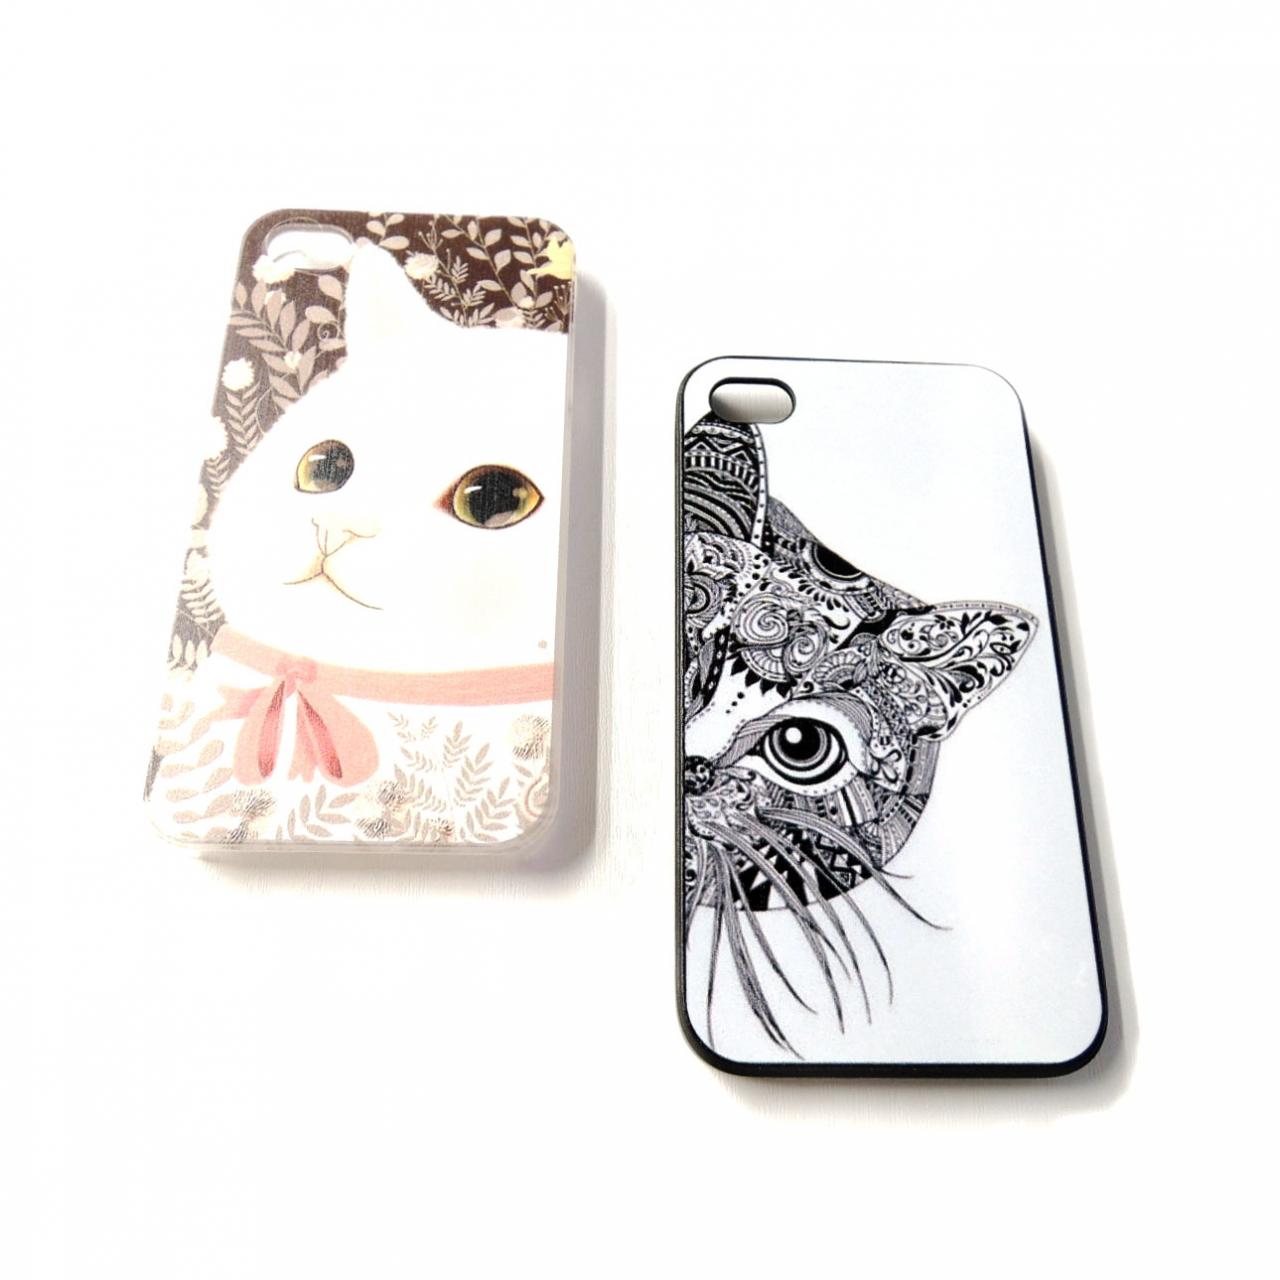 Cats Iphone 4/4s Or 5 Case